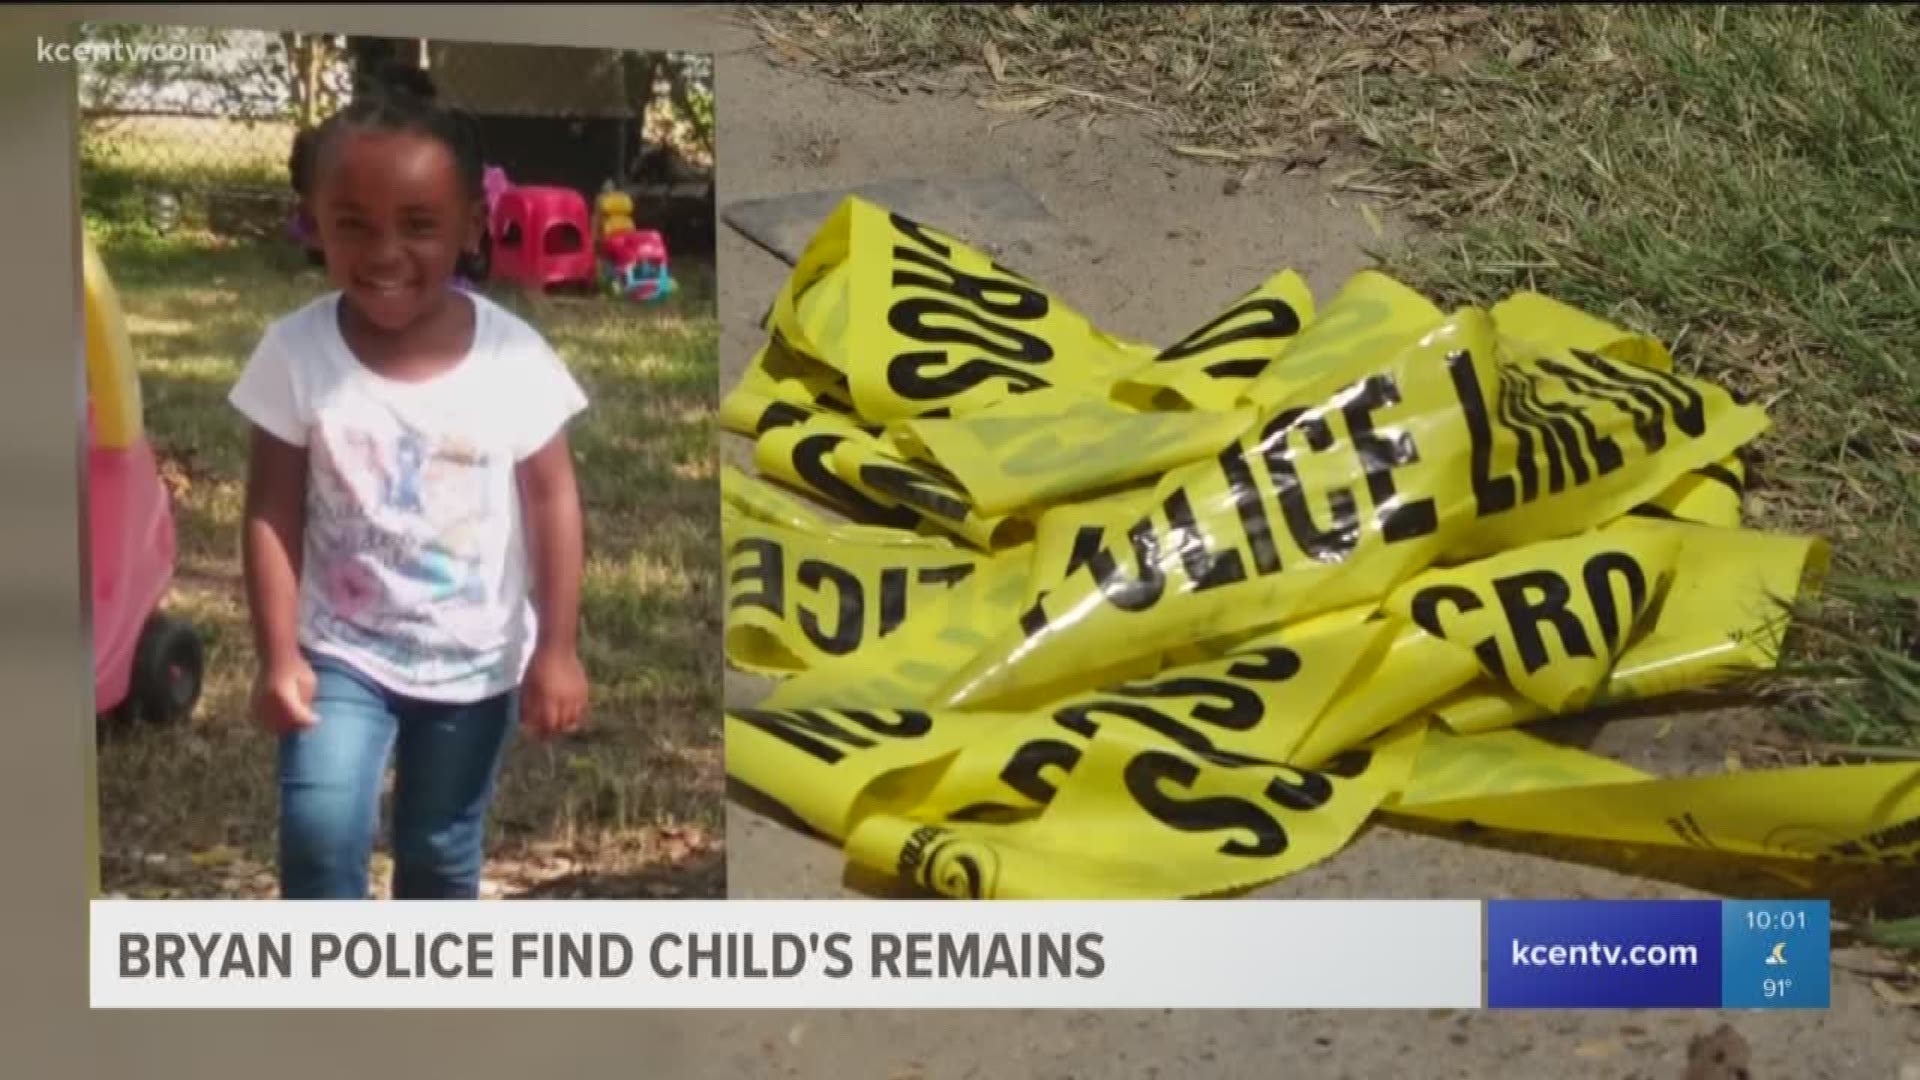 Police said they believe the remains may belong to the missing three-year-old